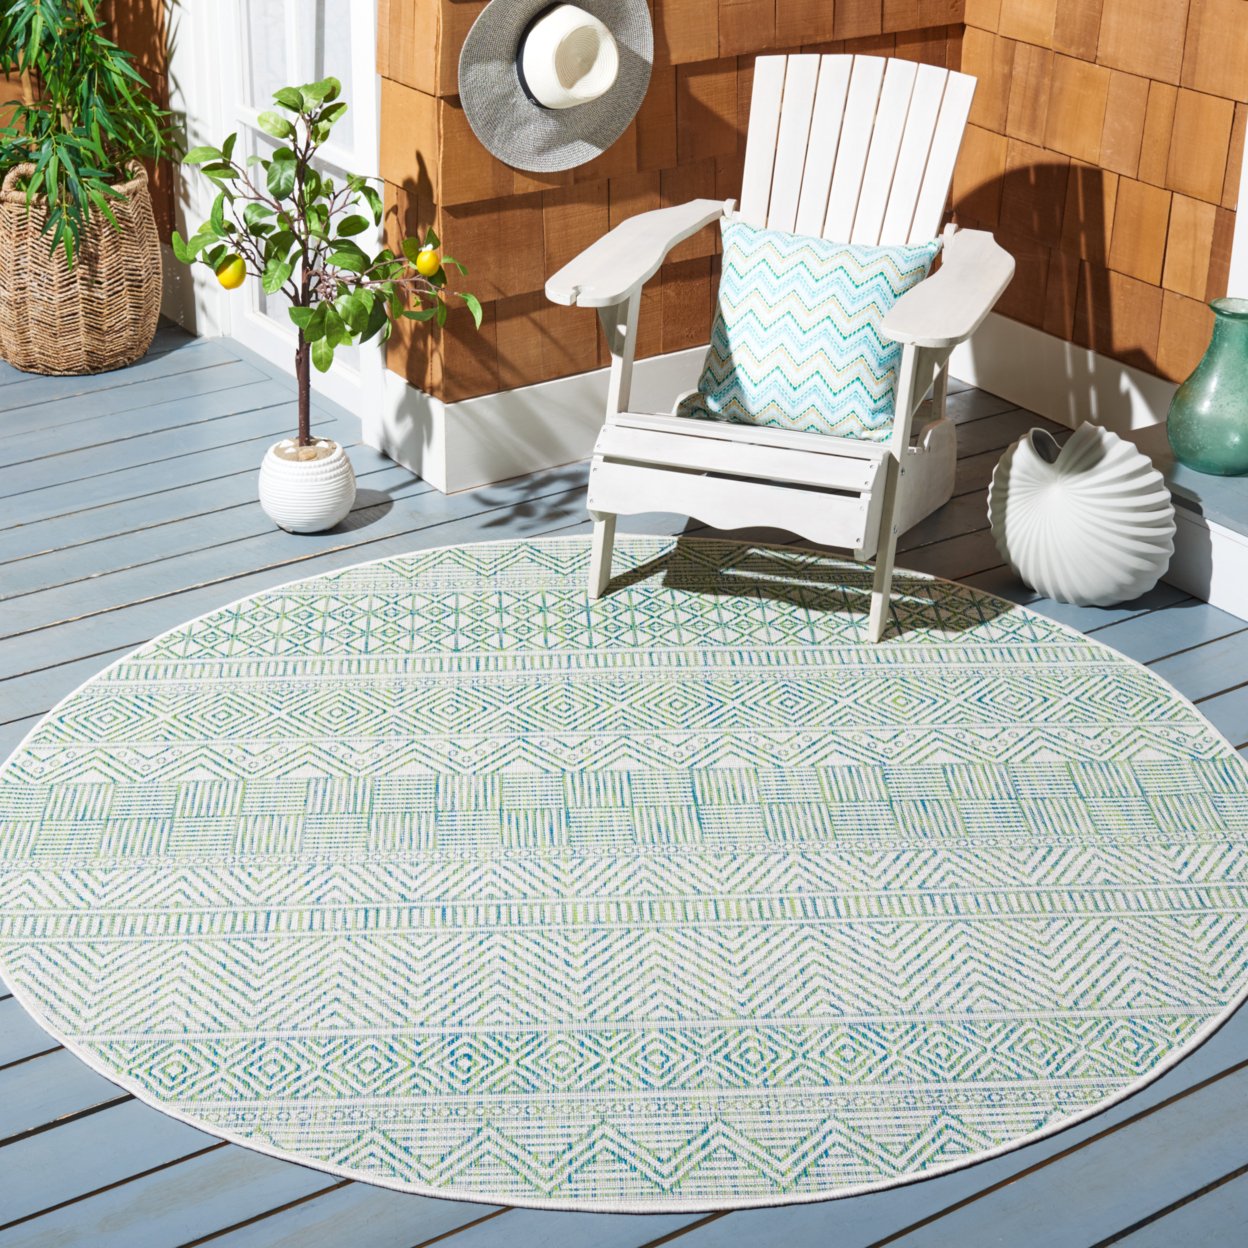 SAFAVIEH Outdoor CY8196-53512 Courtyard Ivory / Turquoise Rug - 8' X 10'